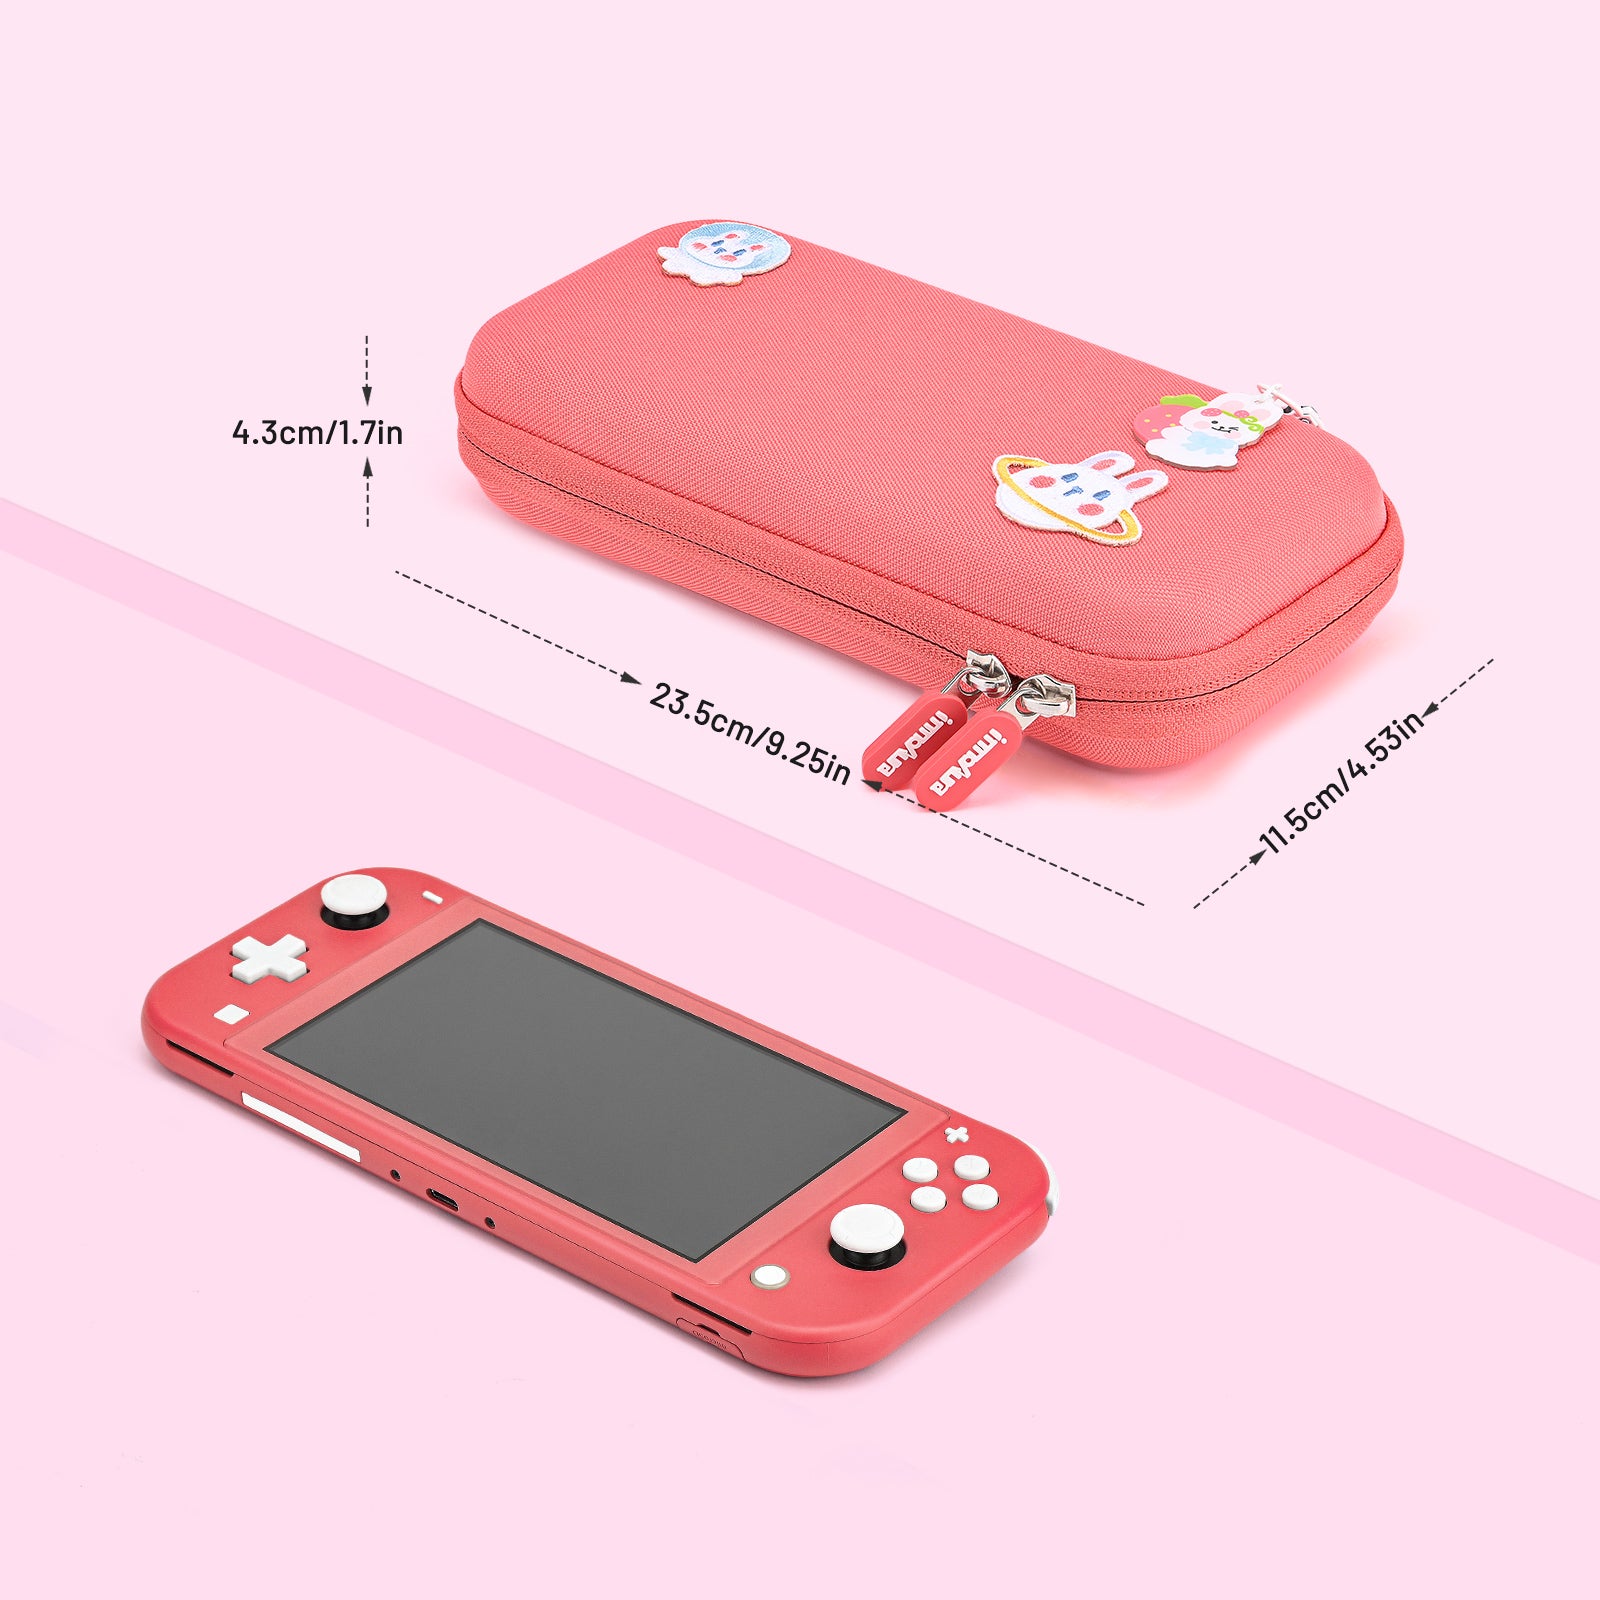 innoAura Hard Lite Case with 17 Accessories Nintendo Siwtch Lite Carrying Case Cute Kawaii Gifts for Kids